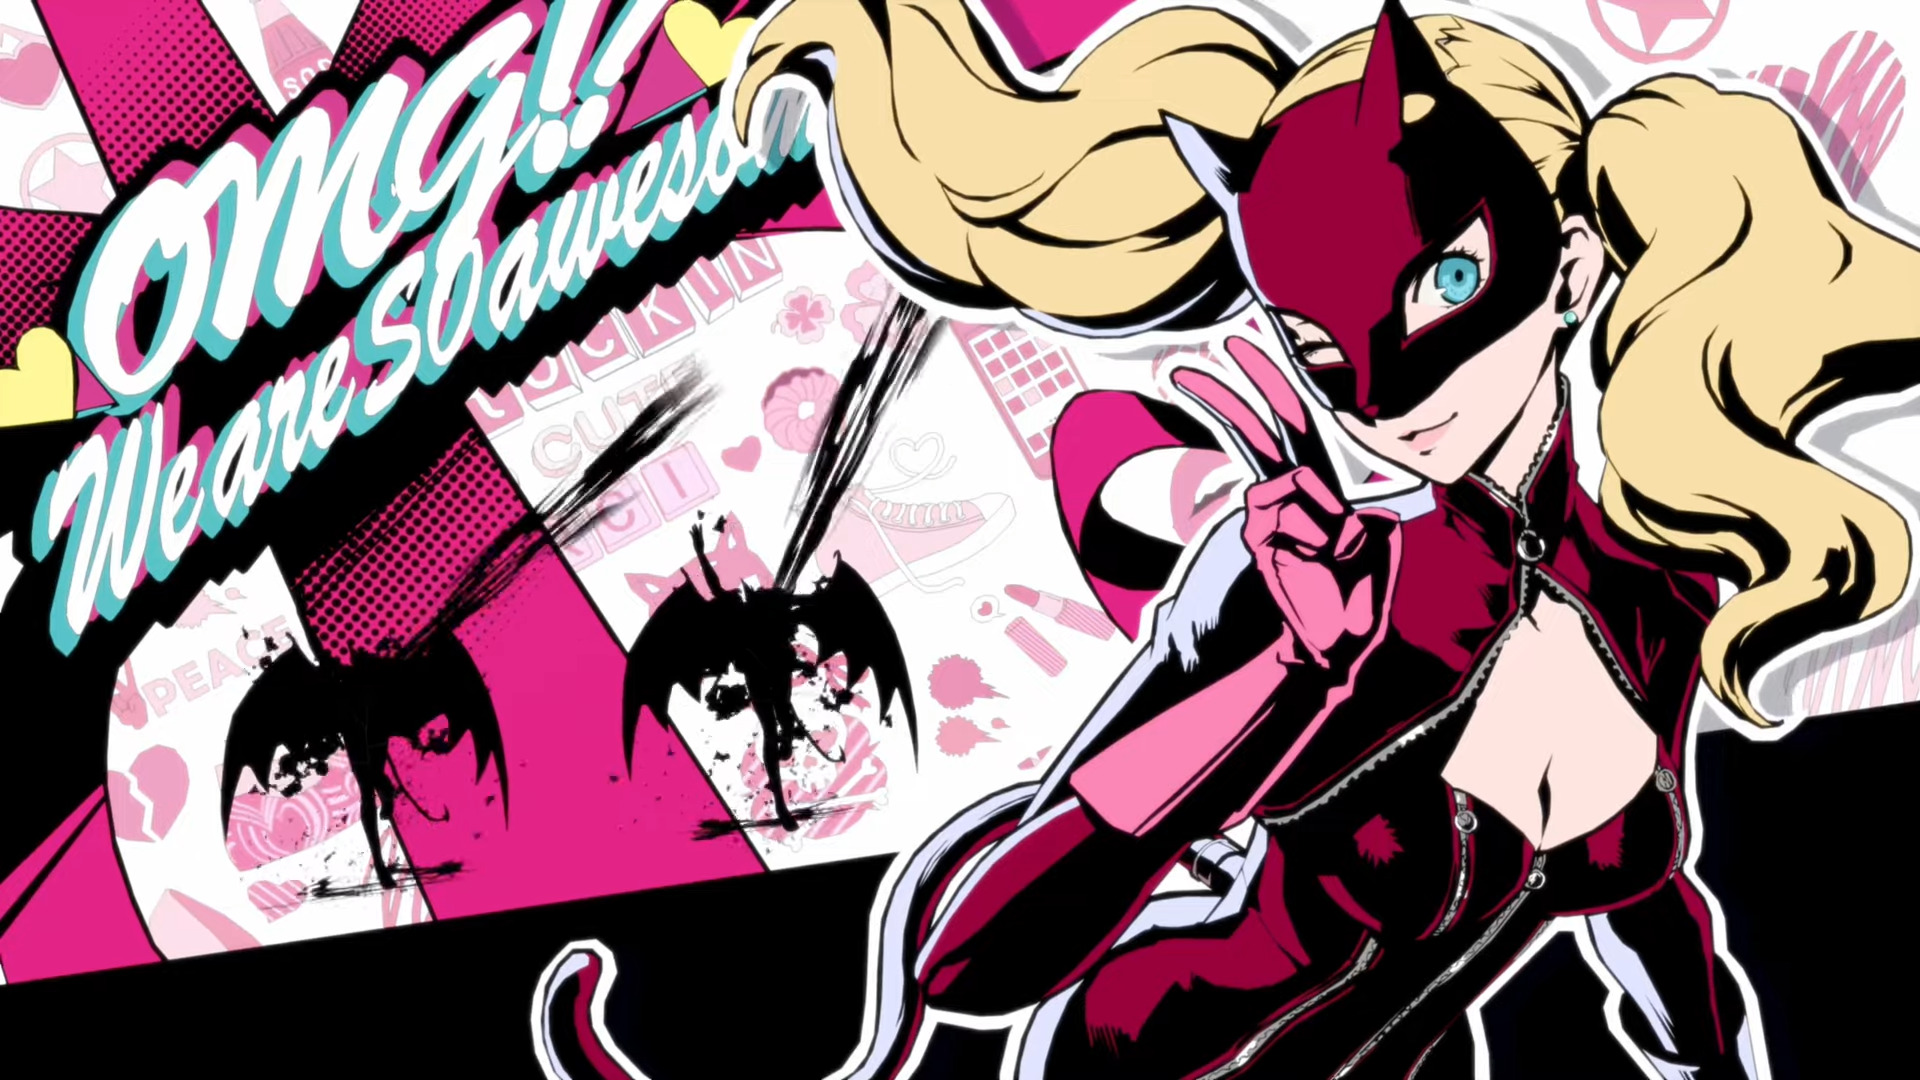 'Persona 5 Royal' Developer Atlus Confirms Several New Games In ...